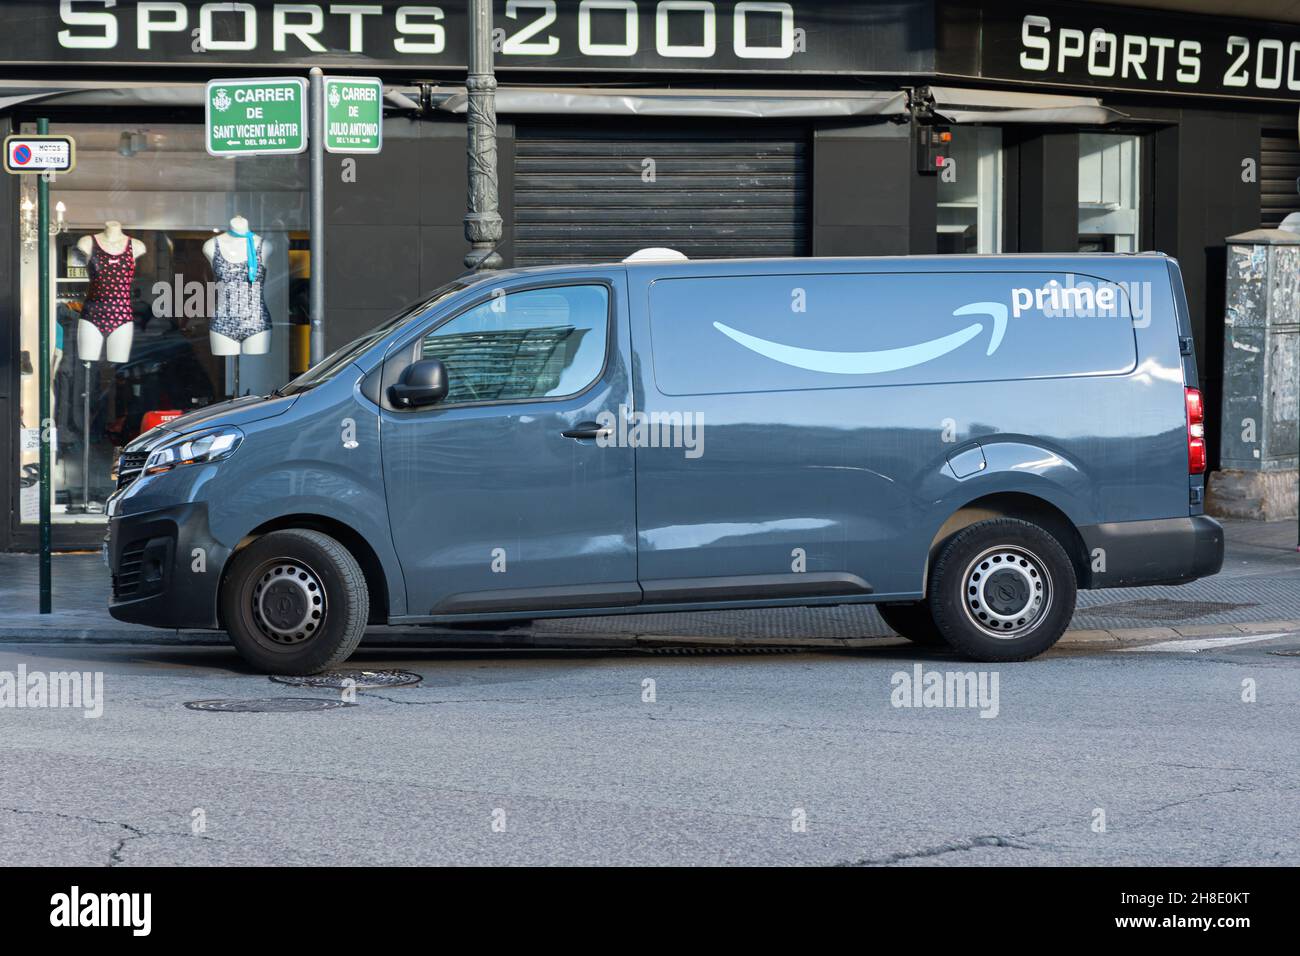 Amazon Delivery Van High Resolution Stock Photography and Images - Alamy